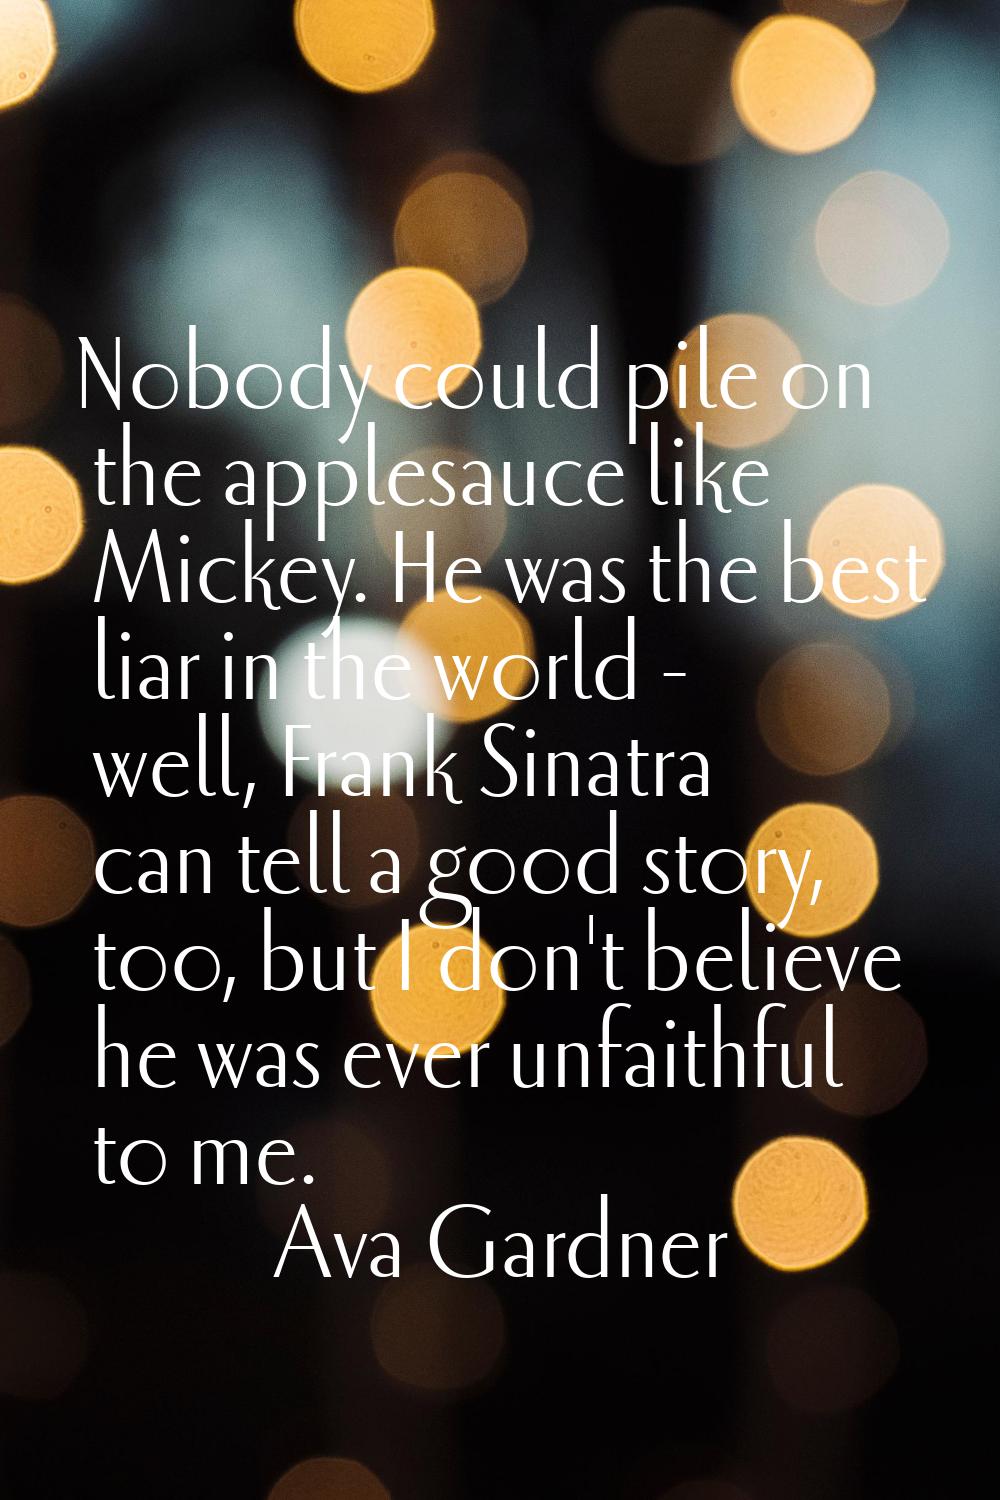 Nobody could pile on the applesauce like Mickey. He was the best liar in the world - well, Frank Si